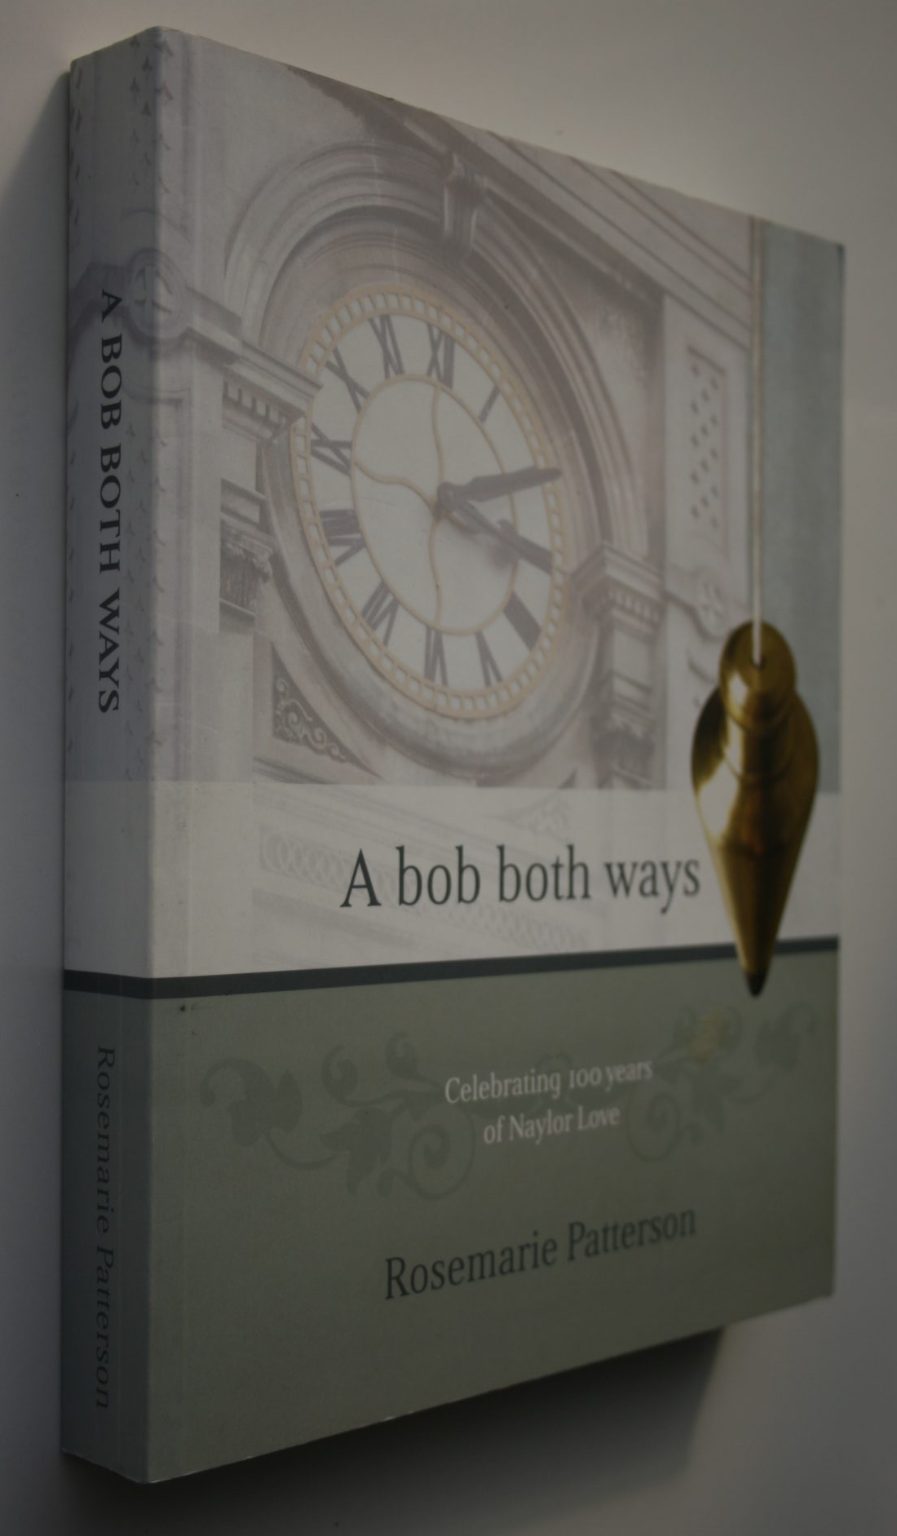 A Bob Both Ways. Celebrating 100 yrs Of Naylor Love. By Rosemarie Patterson. SIGNED BY AUTHOR. No owner inscriptions.